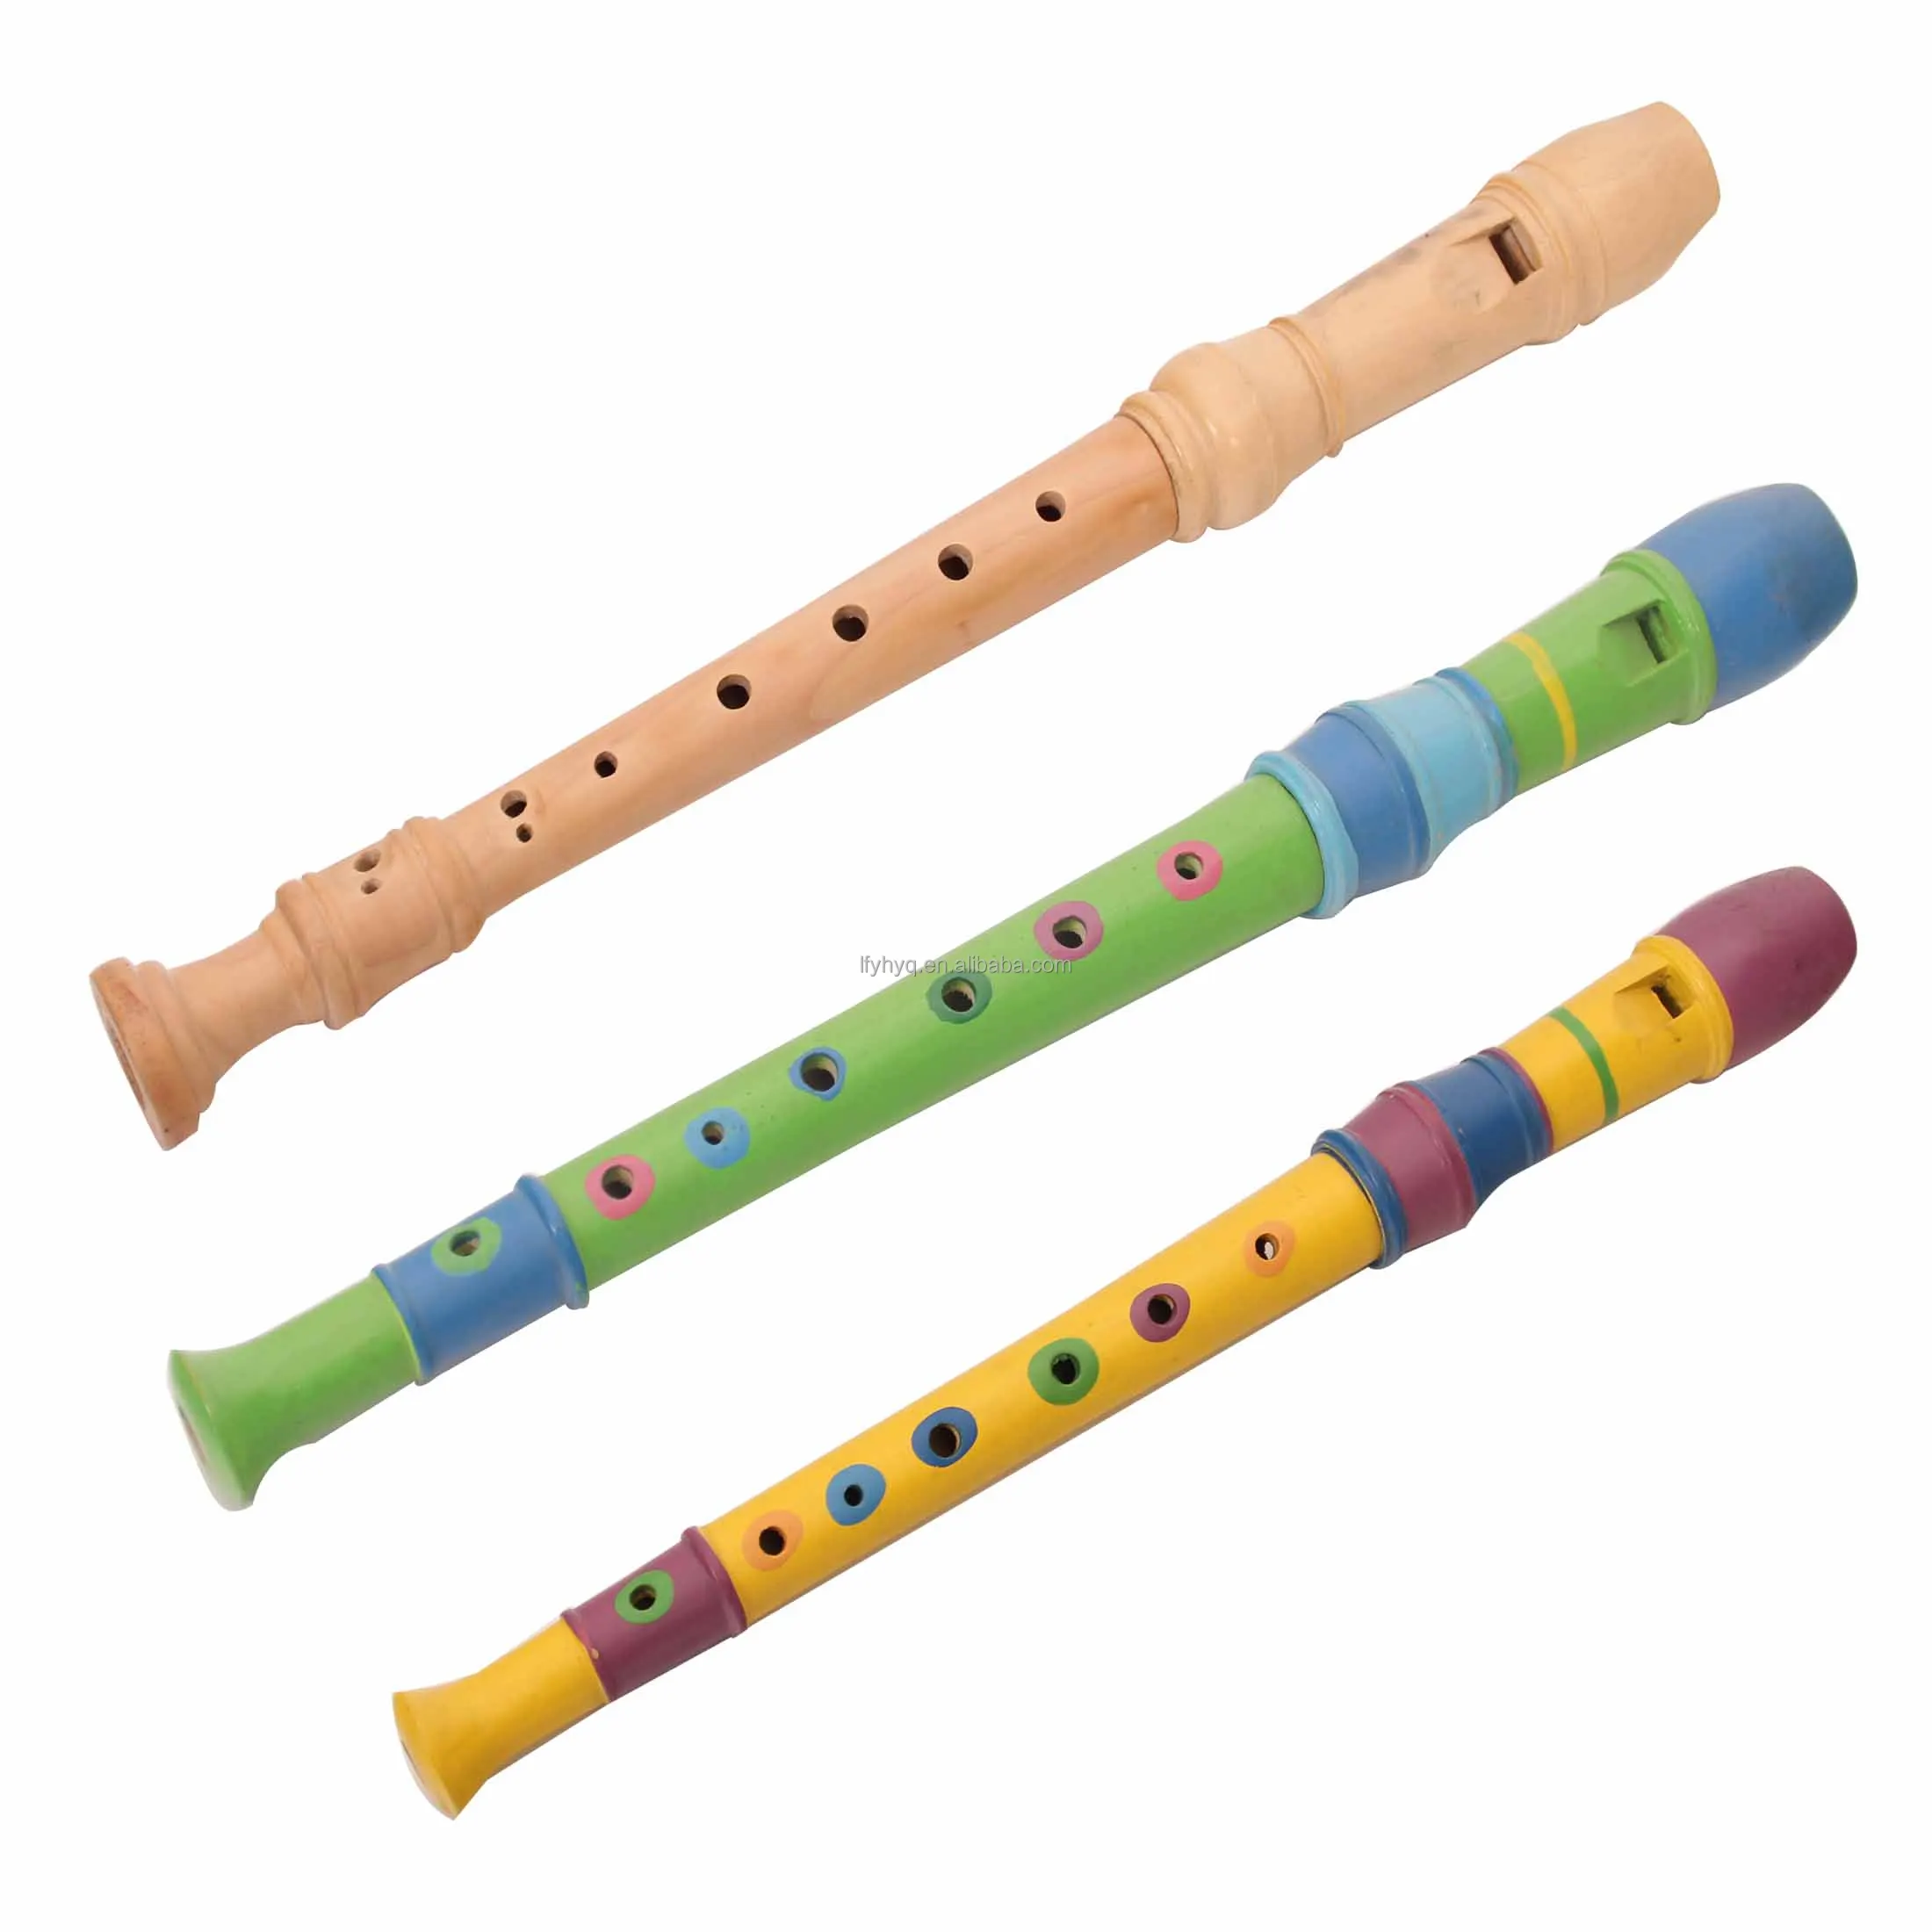 Woodwind Instruments Wood Colorful Flute With10holes - Buy Wood